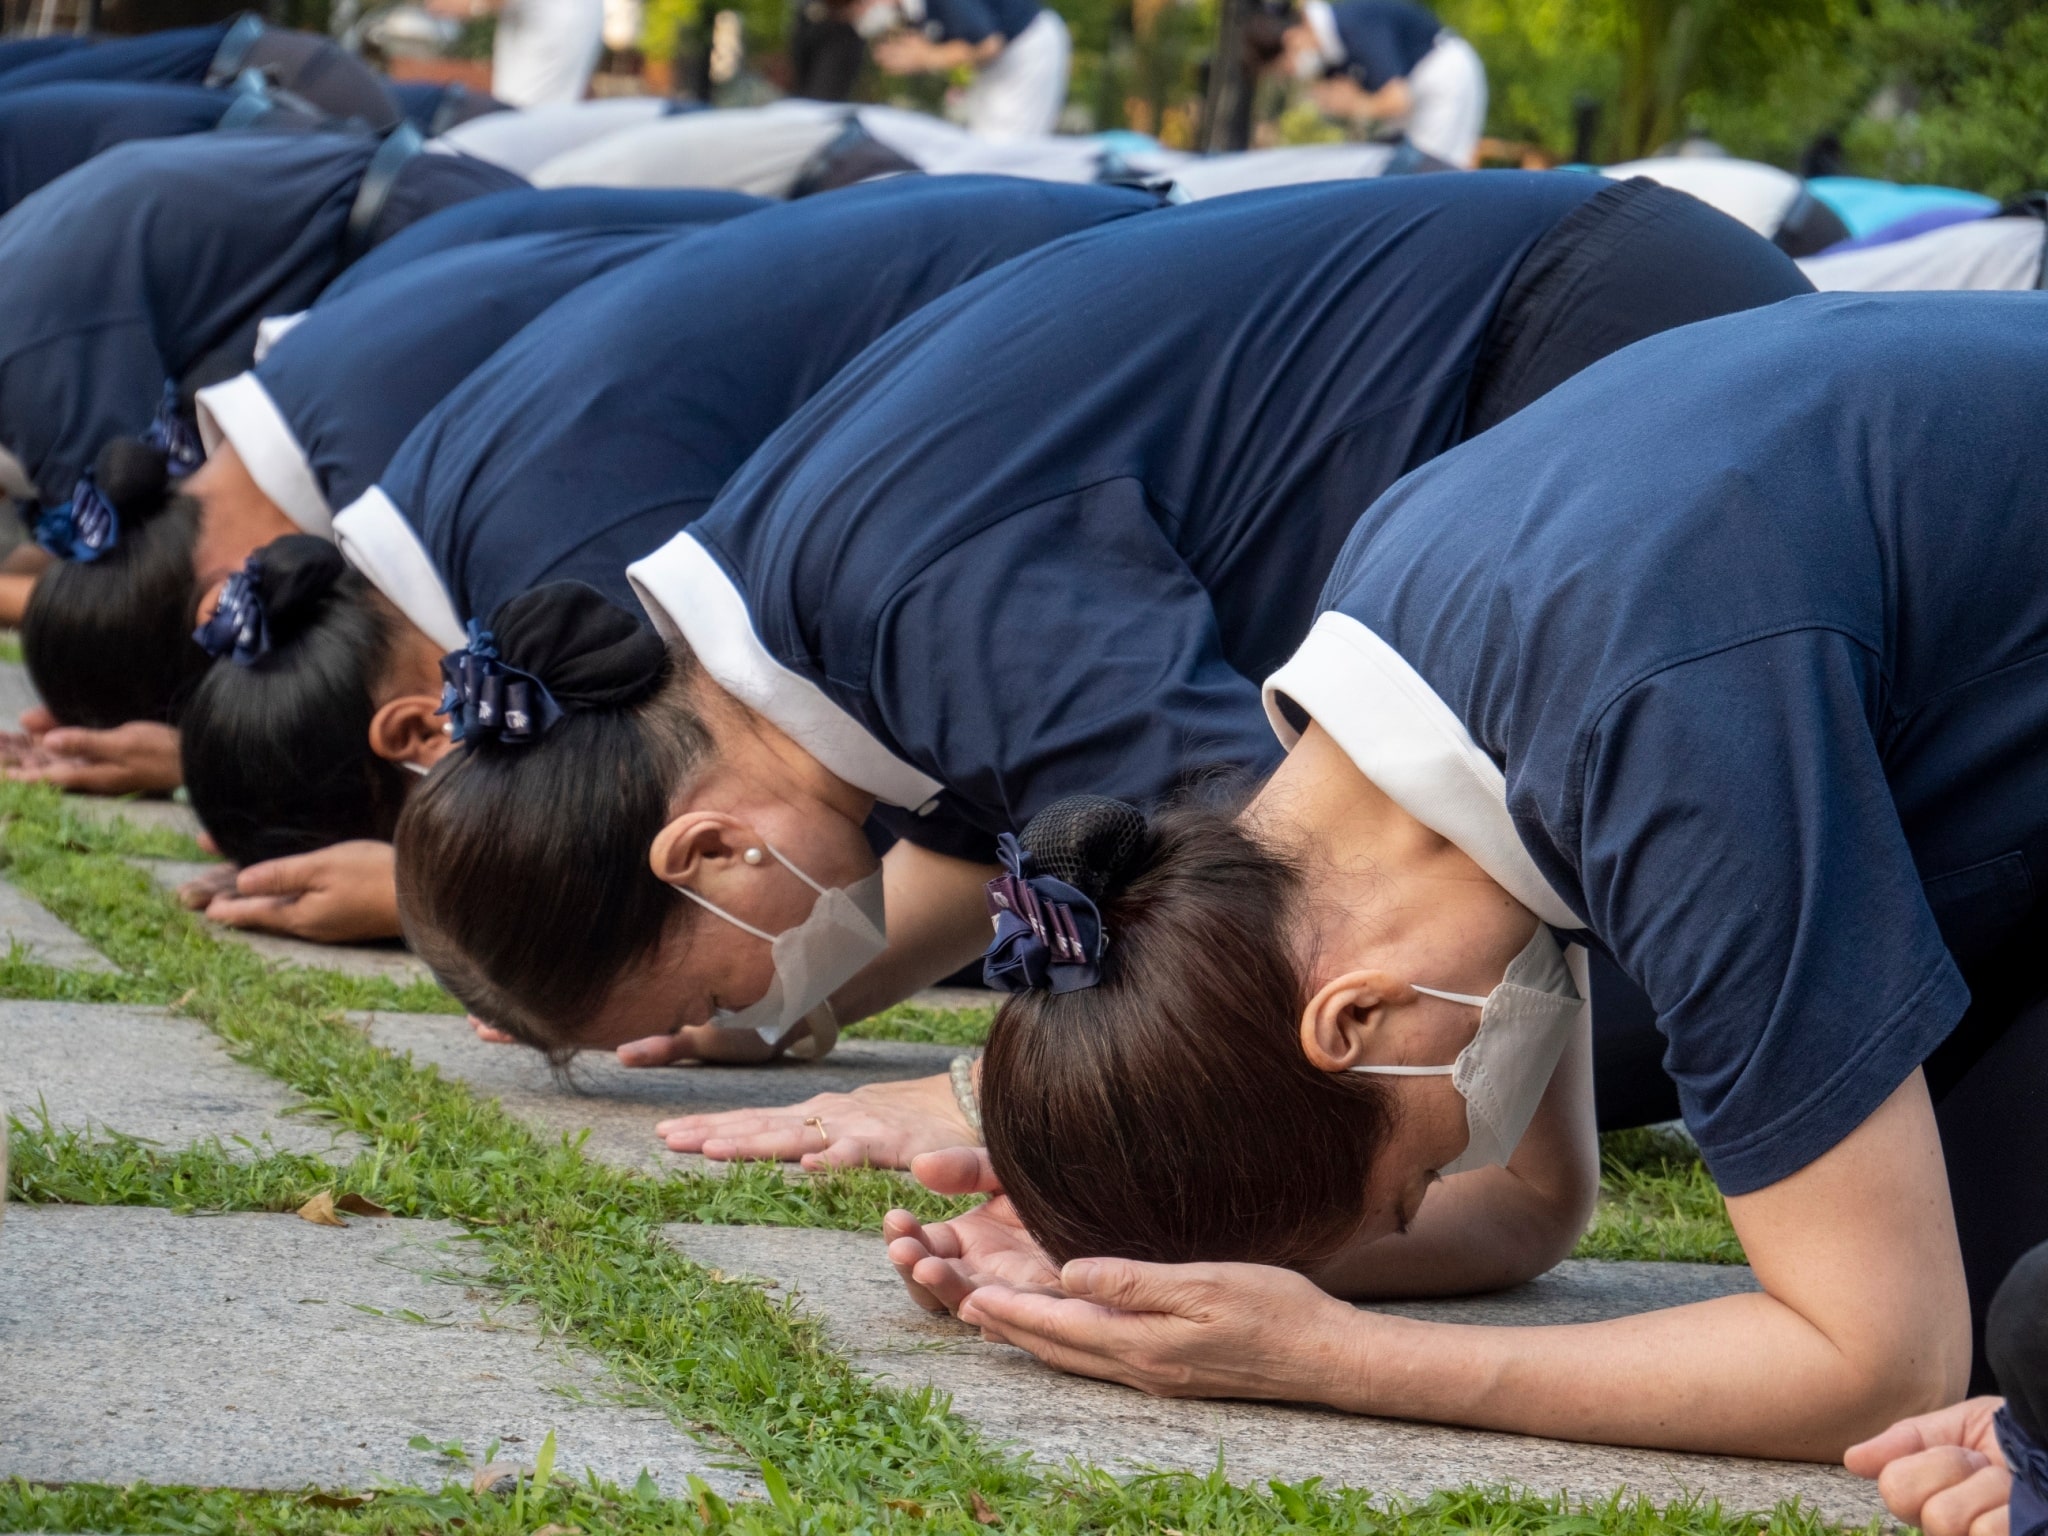 On November 4, Tzu Chi Foundation started its 29th anniversary in the Philippines with the solemn three steps and one bow ceremony at the grounds of Buddhist Tzu Chi Campus in Sta. Mesa, Manila. Commissioners, staffers, volunteers, scholars, and special guests participated in the dawn ritual.【Photo by Matt Serrano】